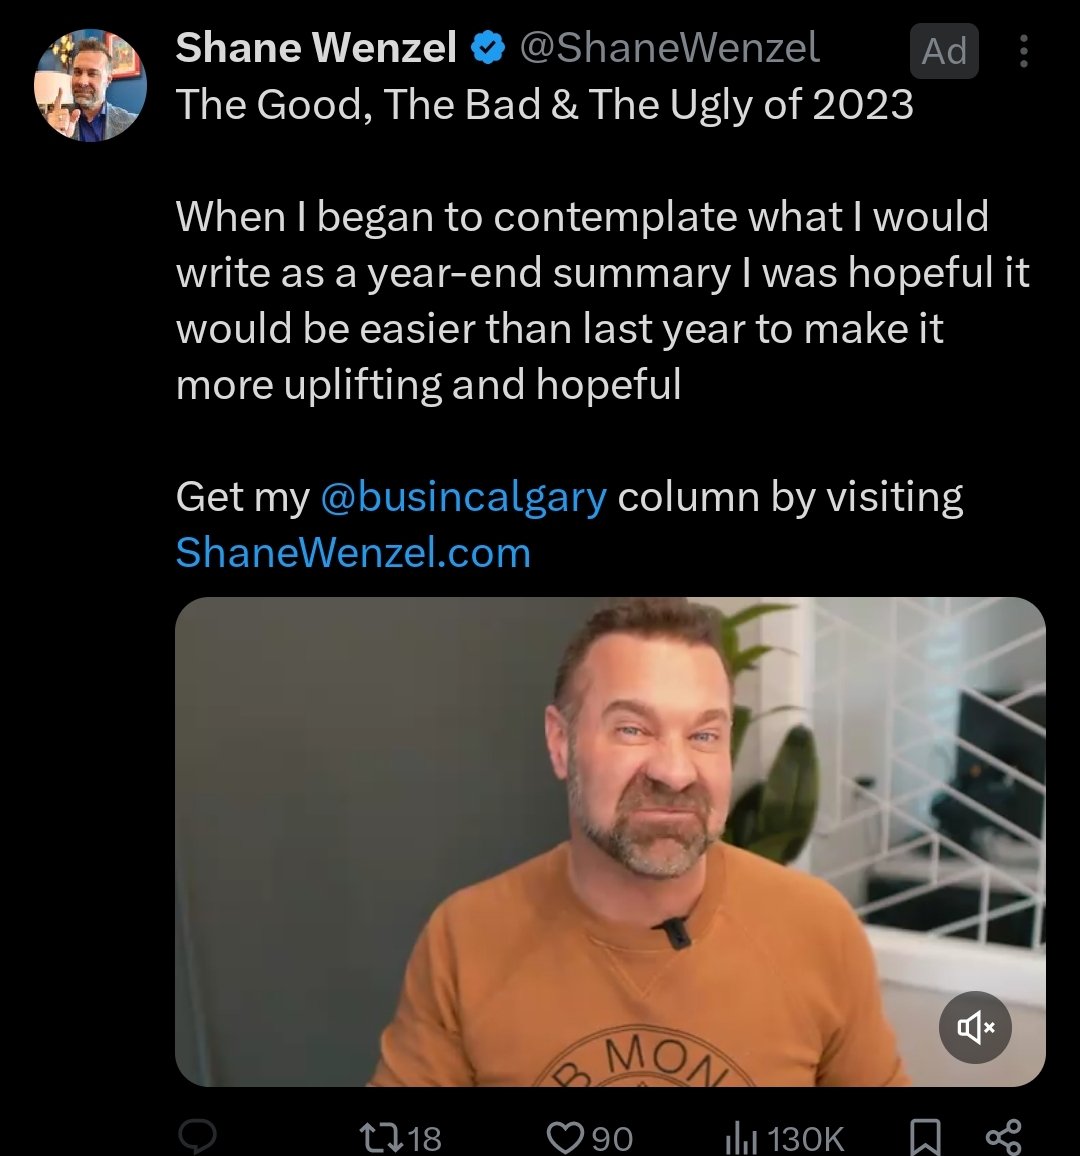 I usually block Xitter ads on principle, but the extraordinary ratio on this one caught my eye. Assuming @ShaneWenzel paid for this ad to gauge support for a #YYC mayoral/council run, it seems quite definitively negative.

Good. 

Imagine if he'd allowed comments? 😂